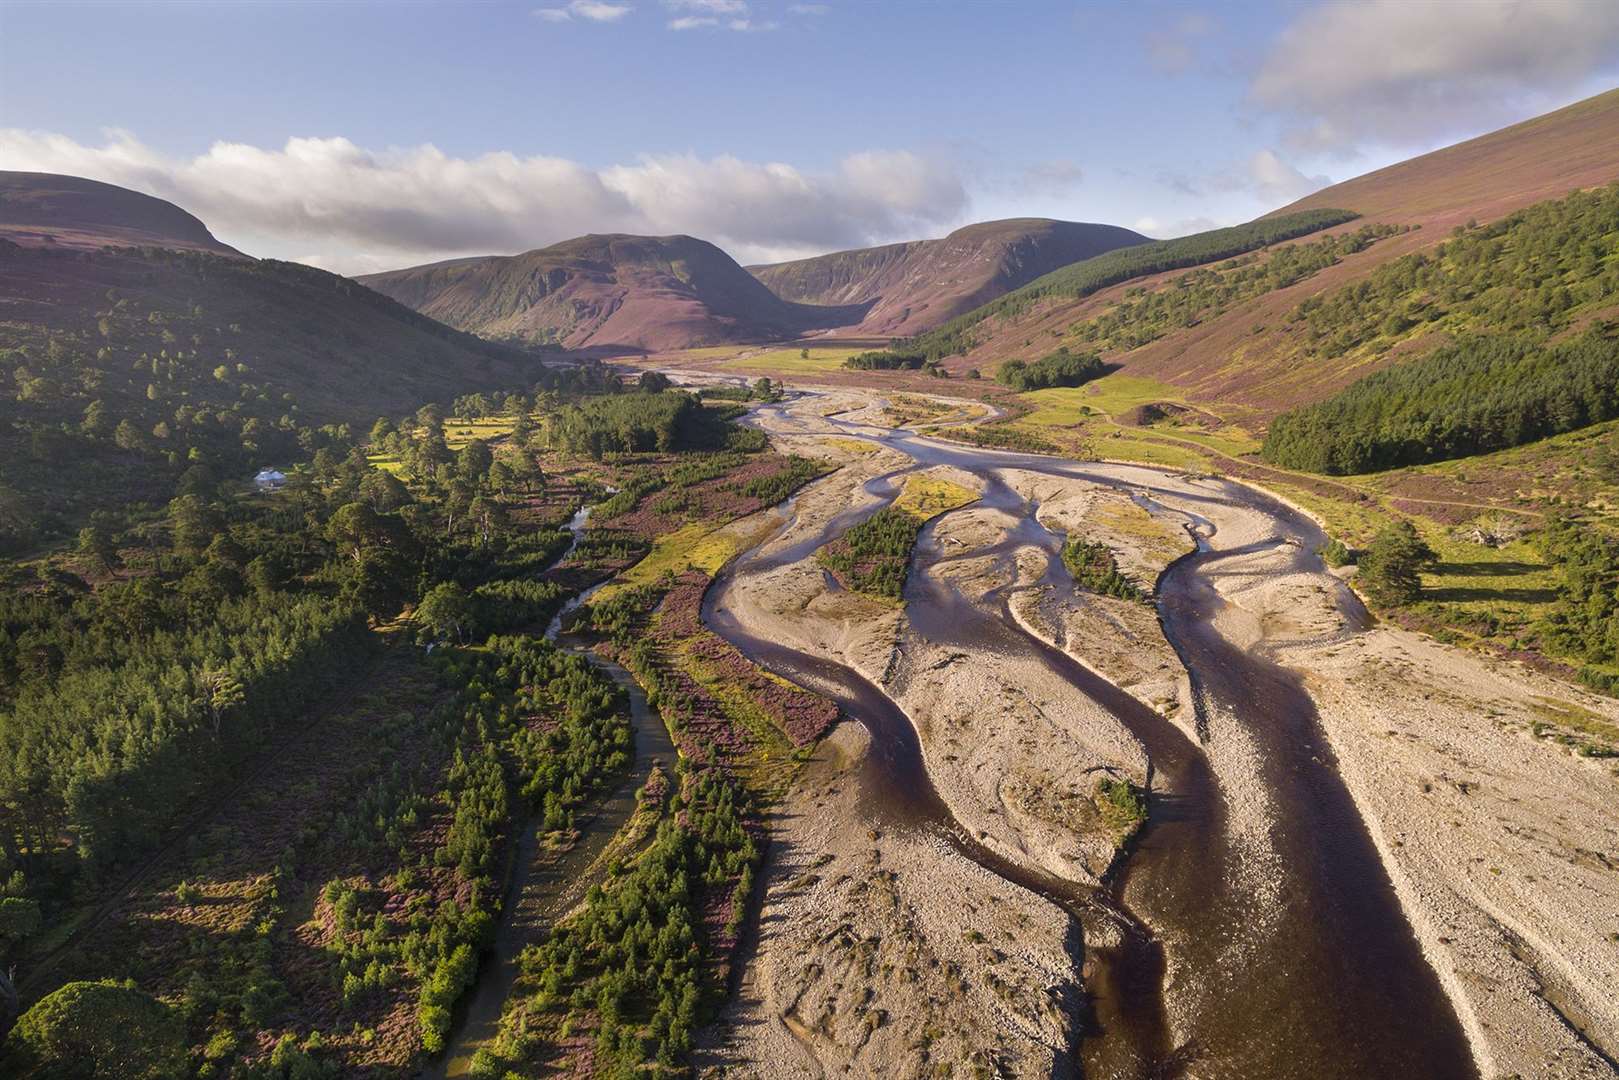 The River Feshie in the Cairngorms National Park, Scotland. Picture by: James Shooter